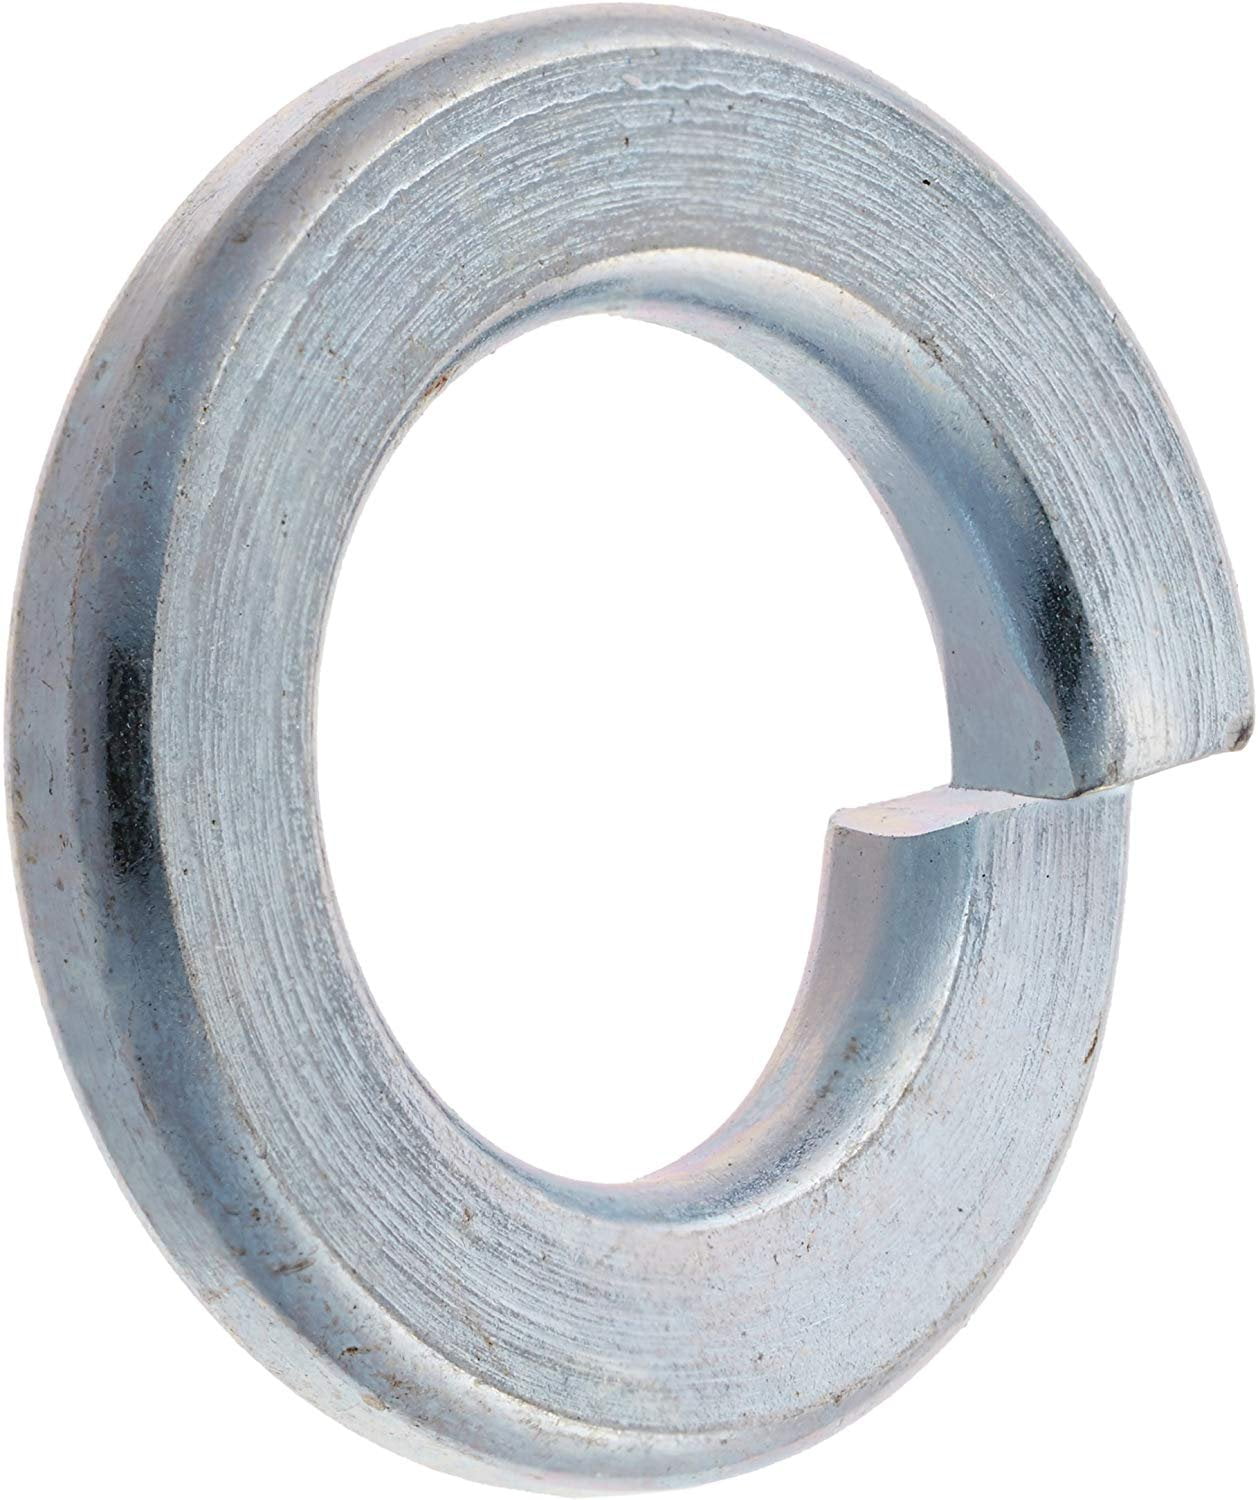 7/16 Lock Washers Steel Zinc Plated 500 count box 